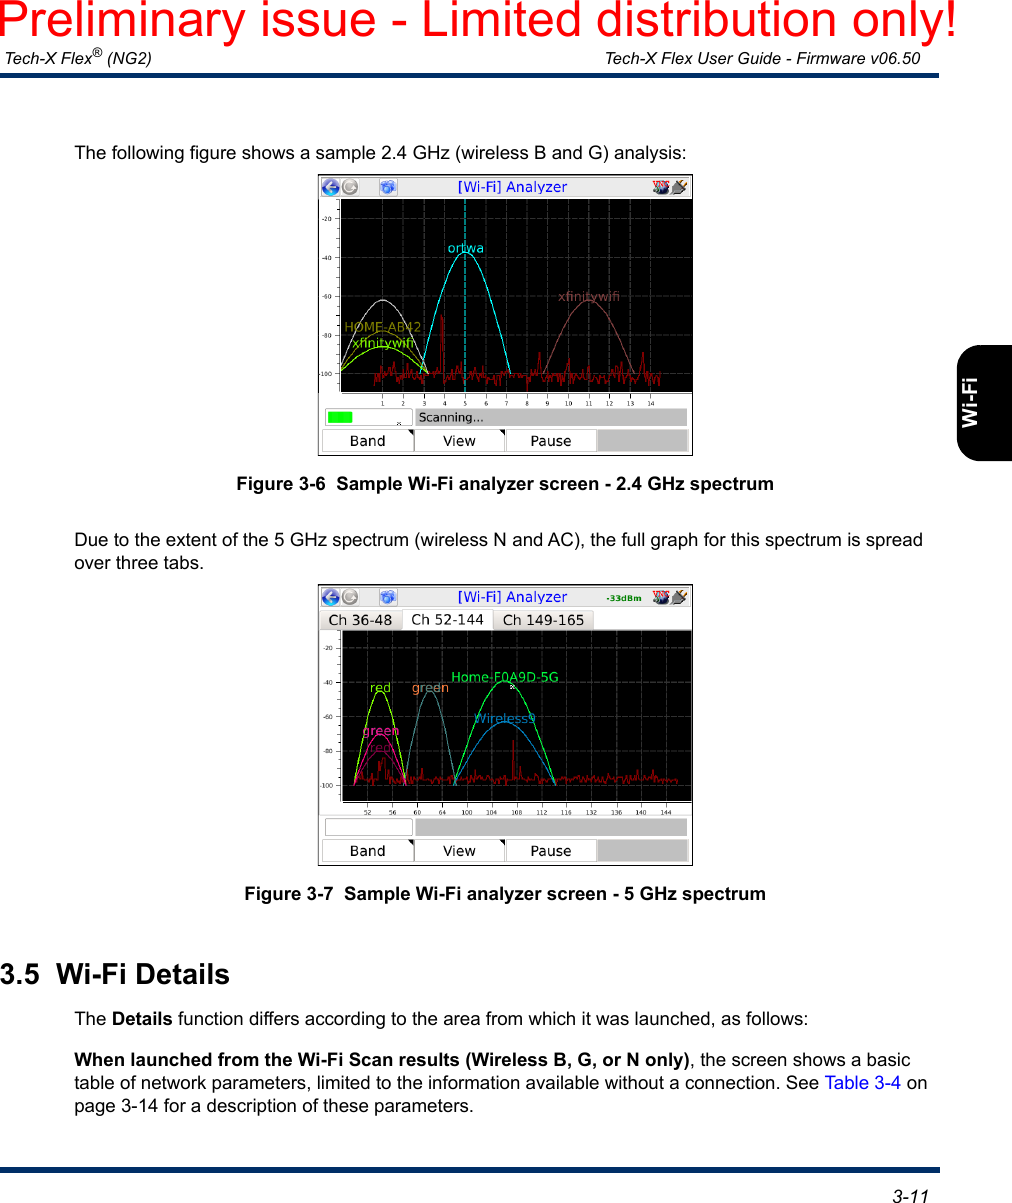  Tech-X Flex® (NG2) Tech-X Flex User Guide - Firmware v06.50   3-11IntroOverviewWi-FiEthernetSystemIP/VideoMoCARFSpecsThe following figure shows a sample 2.4 GHz (wireless B and G) analysis:Figure 3-6  Sample Wi-Fi analyzer screen - 2.4 GHz spectrumDue to the extent of the 5 GHz spectrum (wireless N and AC), the full graph for this spectrum is spread over three tabs.Figure 3-7  Sample Wi-Fi analyzer screen - 5 GHz spectrum3.5  Wi-Fi DetailsThe Details function differs according to the area from which it was launched, as follows:When launched from the Wi-Fi Scan results (Wireless B, G, or N only), the screen shows a basic table of network parameters, limited to the information available without a connection. See Table 3-4 on page 3-14 for a description of these parameters.Preliminary issue - Limited distribution only!